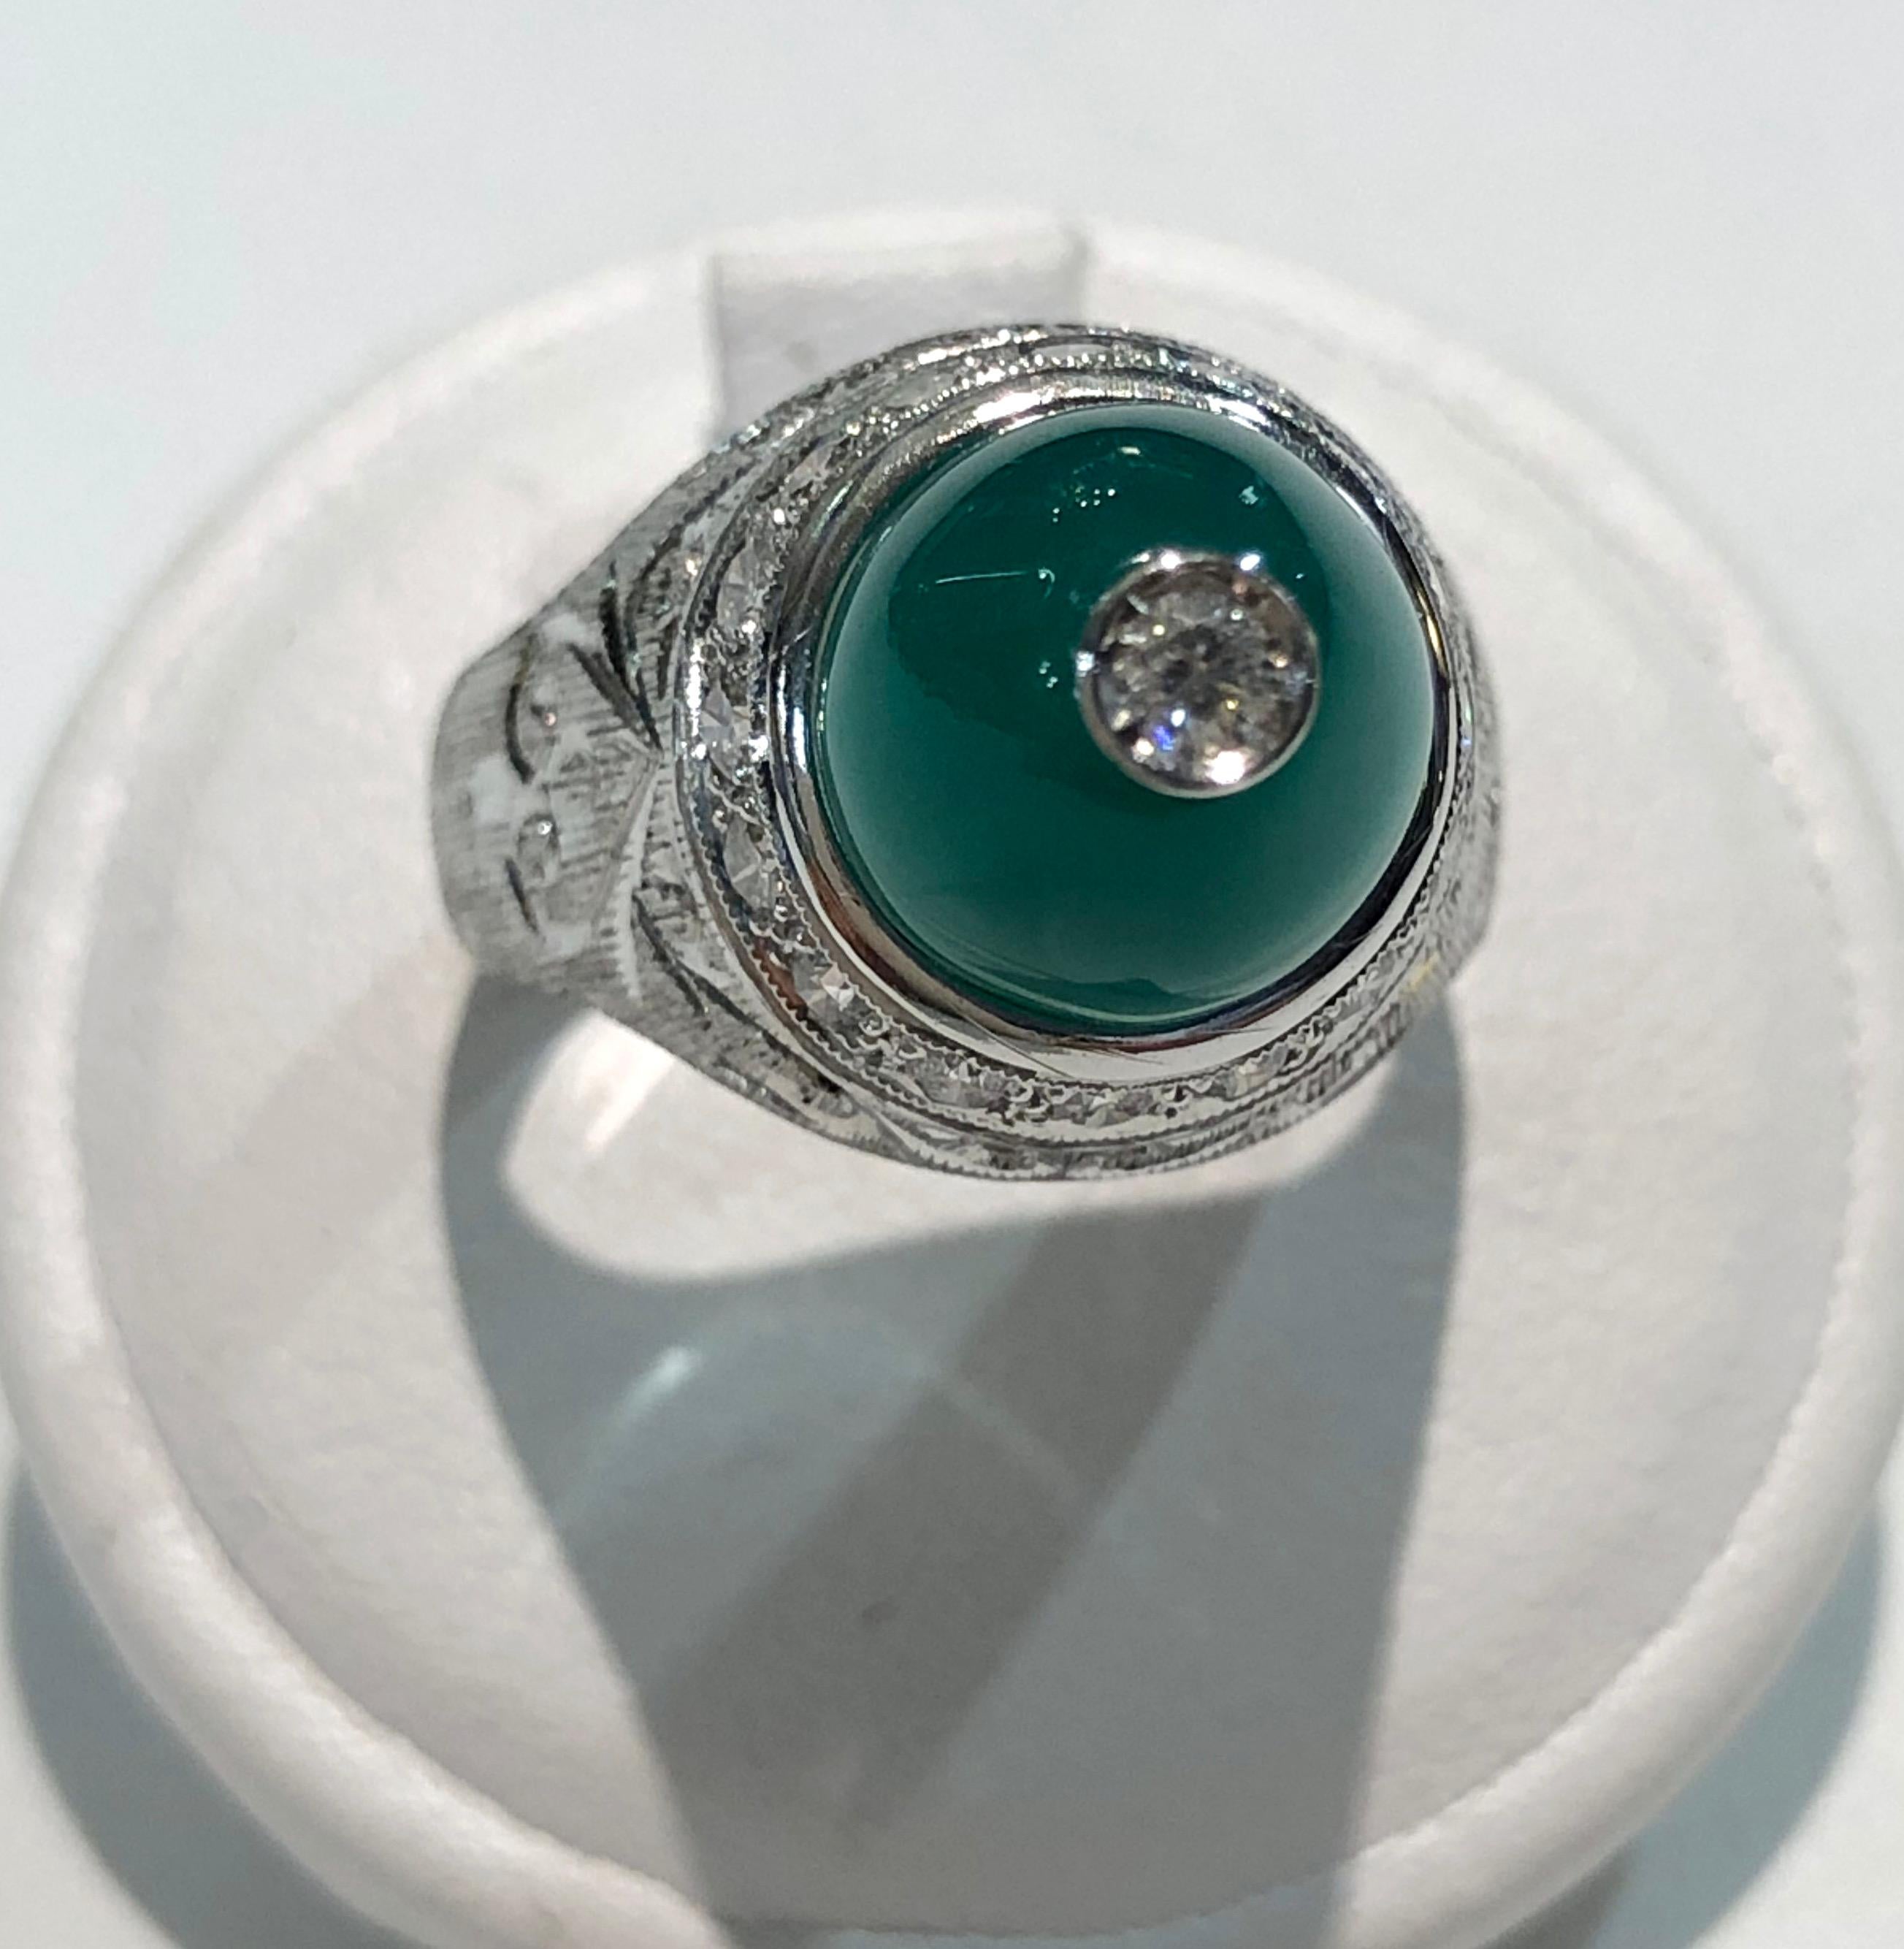 Vintage ring with 18 karat white gold band, one large Chrysoprase stone and brilliant diamonds for a total of 0.48 karats, Italy 1960s
Ring size US 7